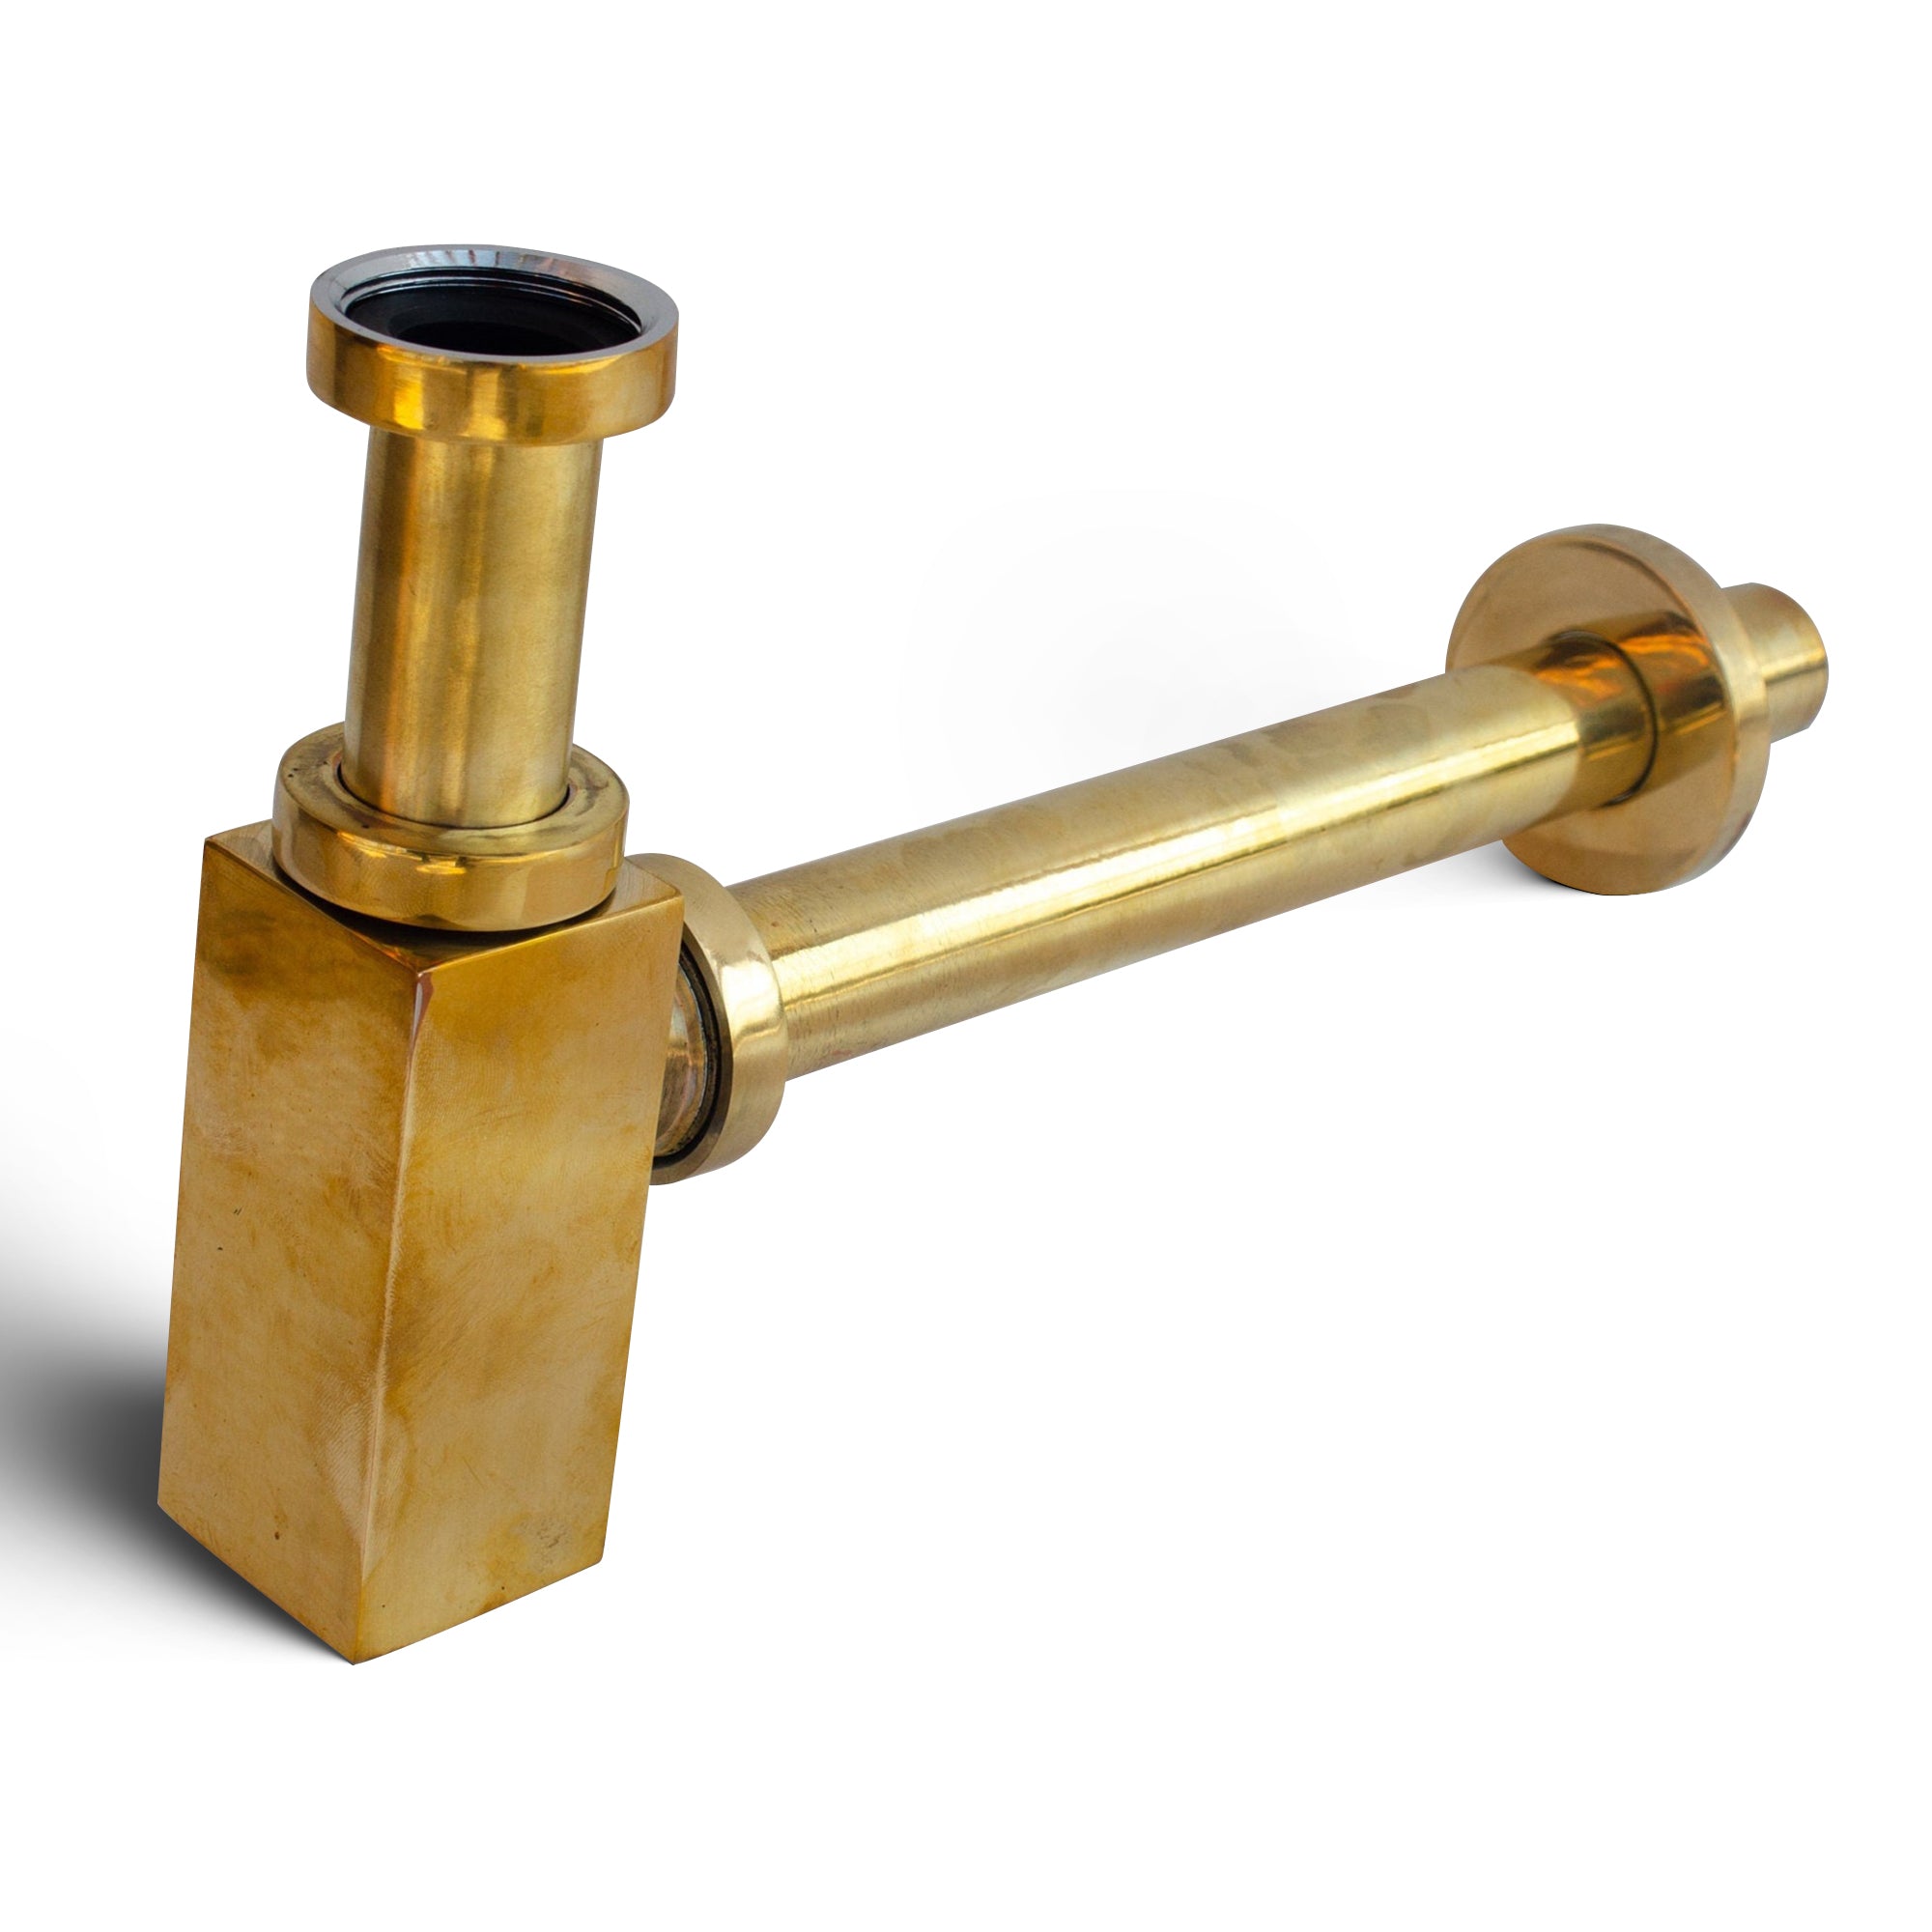 Unlacquered Brass Water Trap Sink Stopper With Push Up Button - Zayian